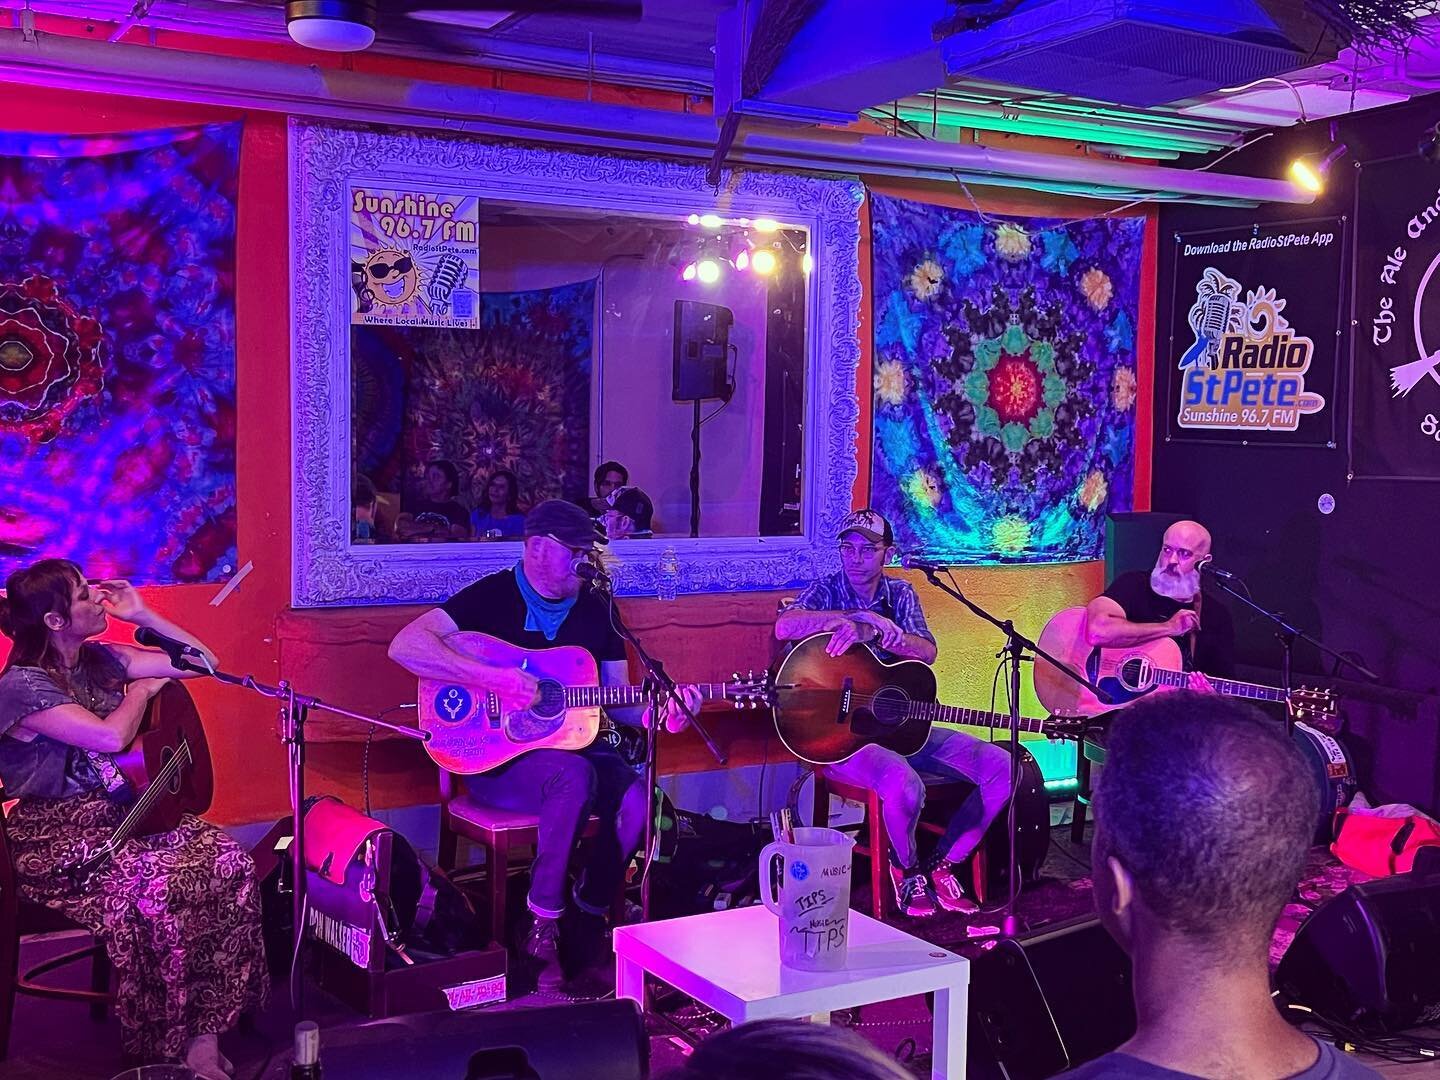 Another epic writers round with another #yborcityrecords artist in the lineup: @the_joshua_reilly in great company with our friends @debrubymusic , @hgwtmusic and @quinlan_will . 

Thanks to @aleandthewitch for supporting great songwriting in #stpete